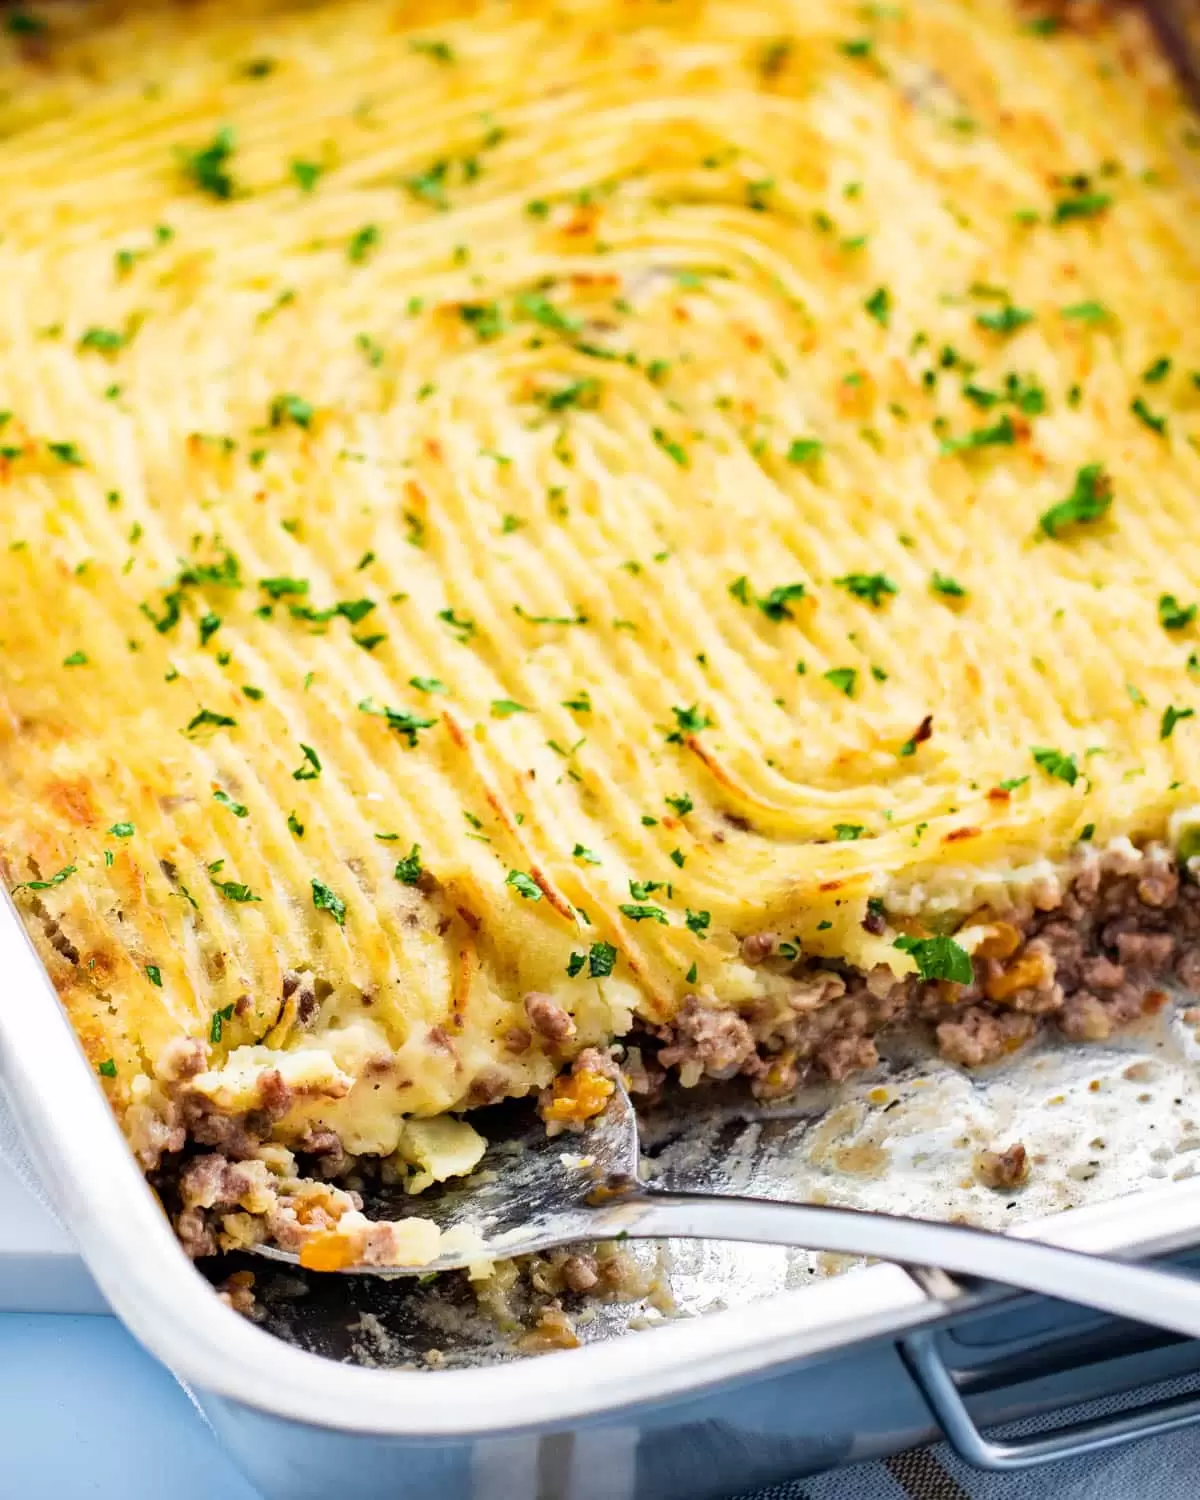 a casserole dish with freshly made shepherd's pie garnished with parsley